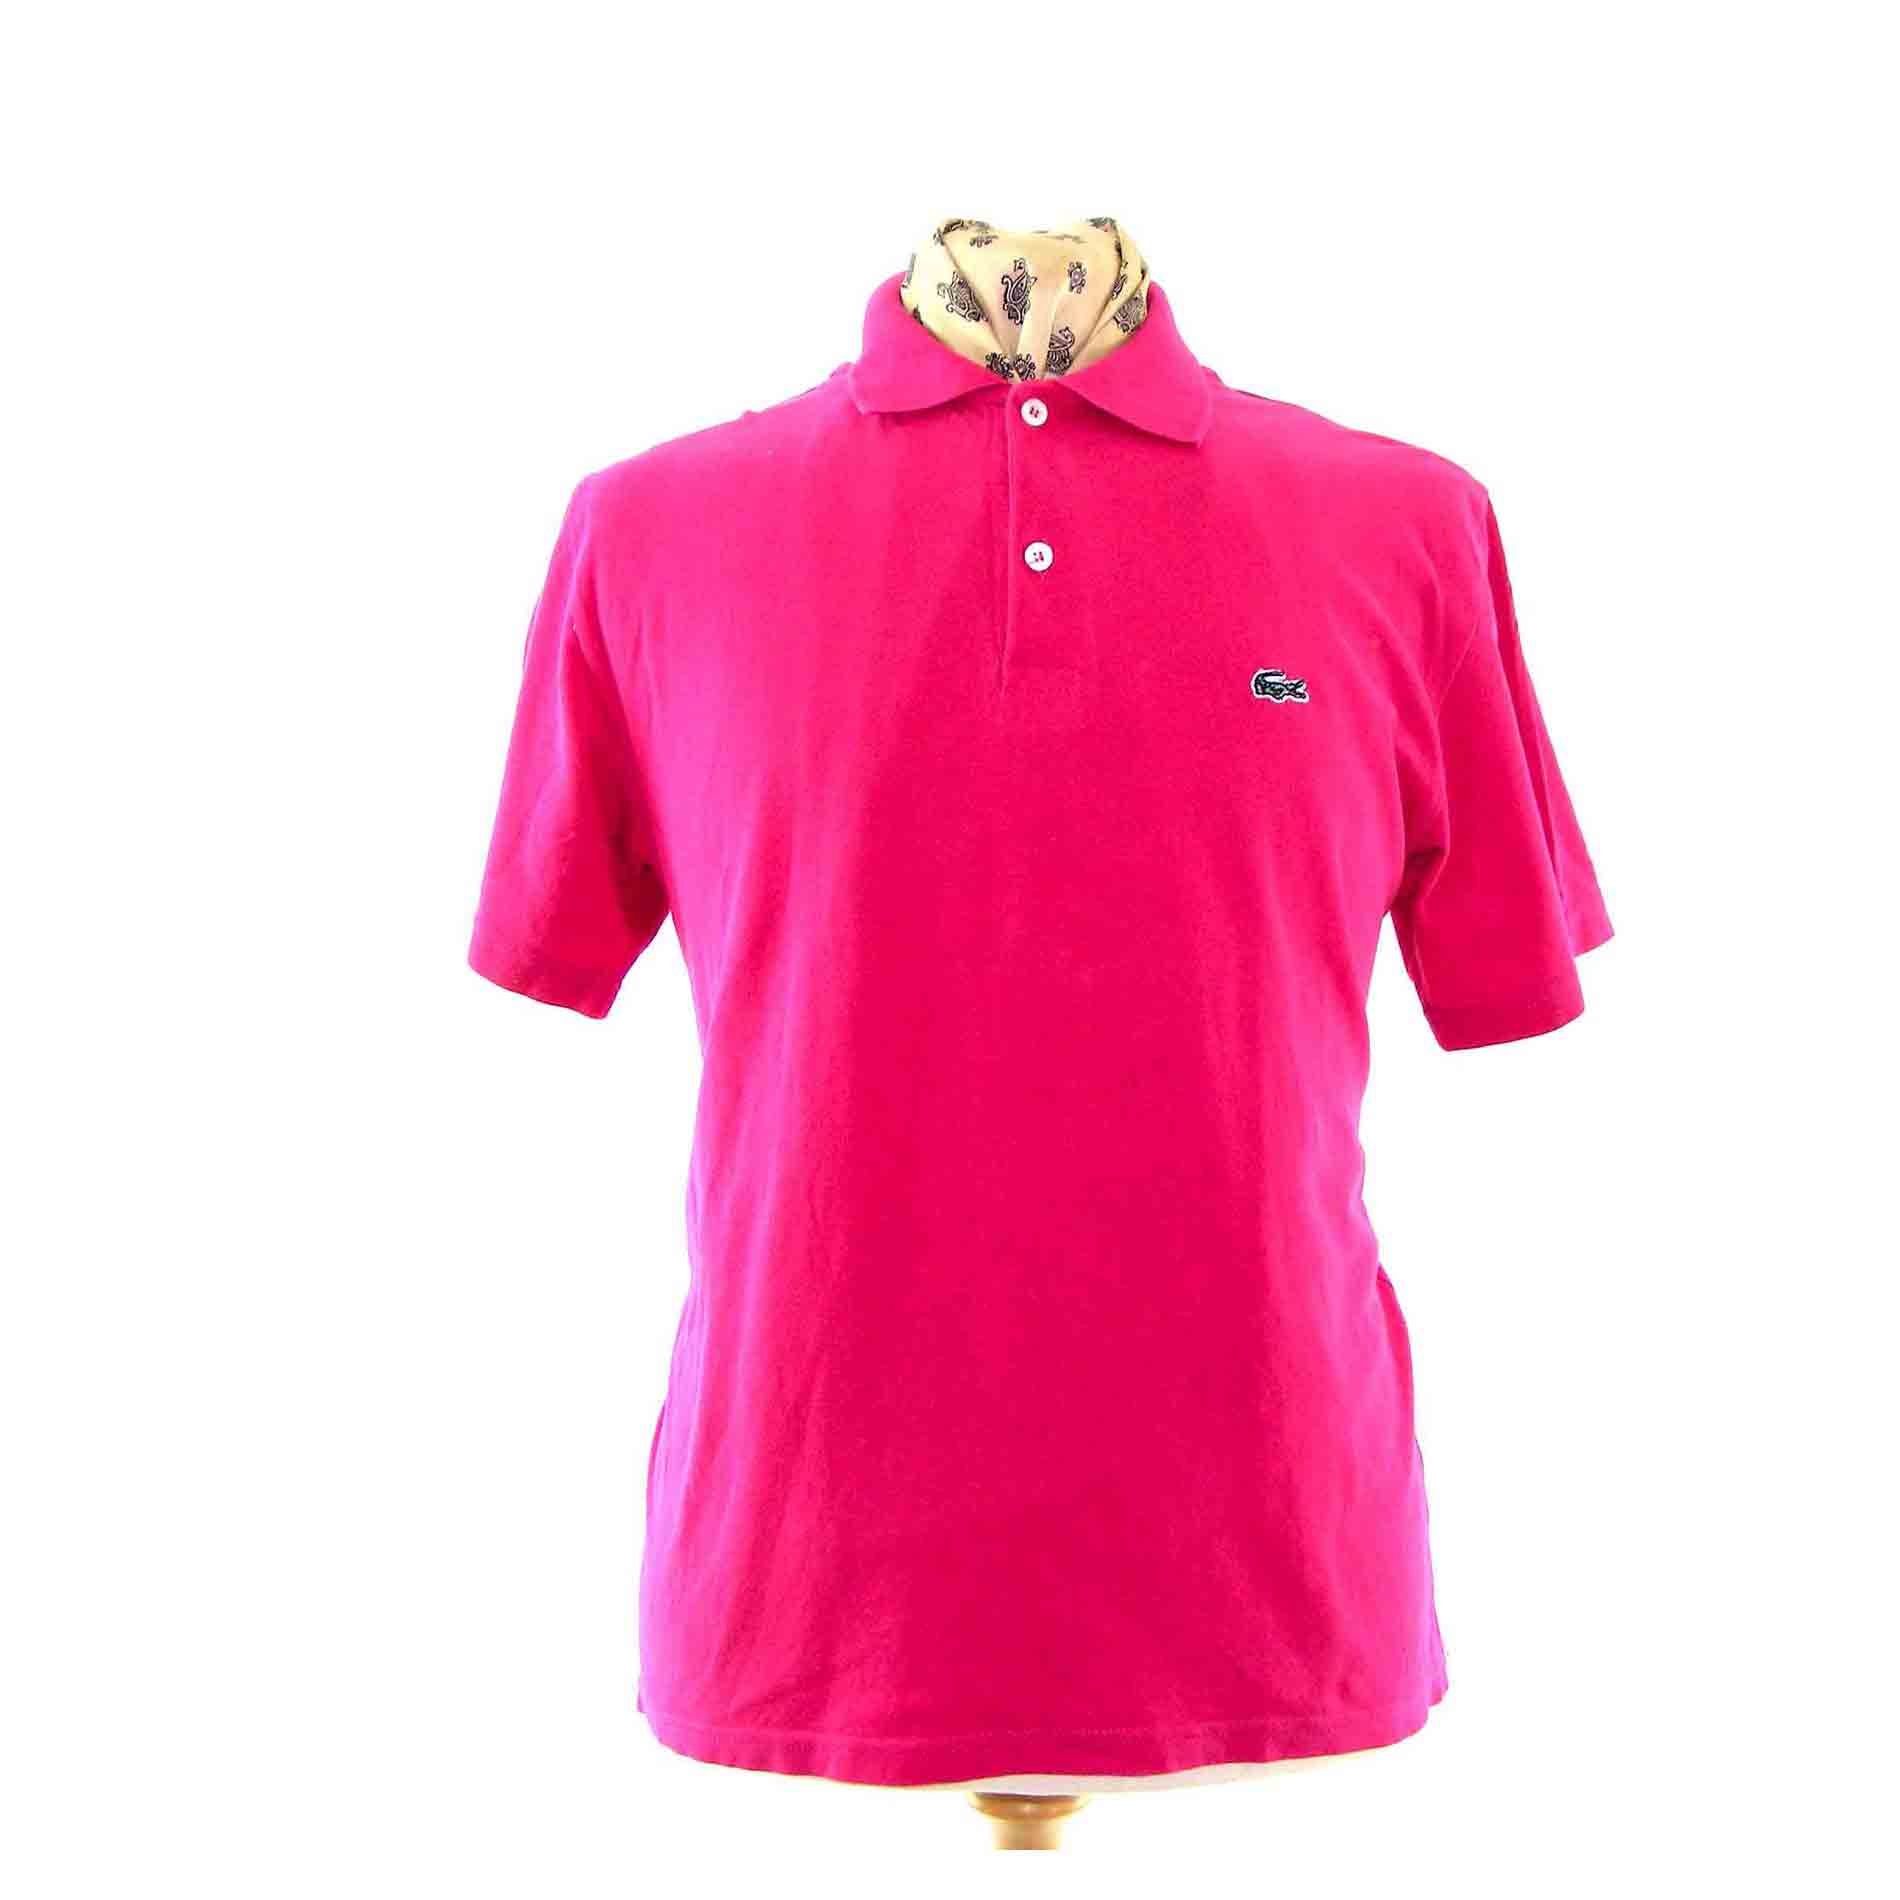 Fluorescent pink polo shirt - Blue 17 Vintage Clothing